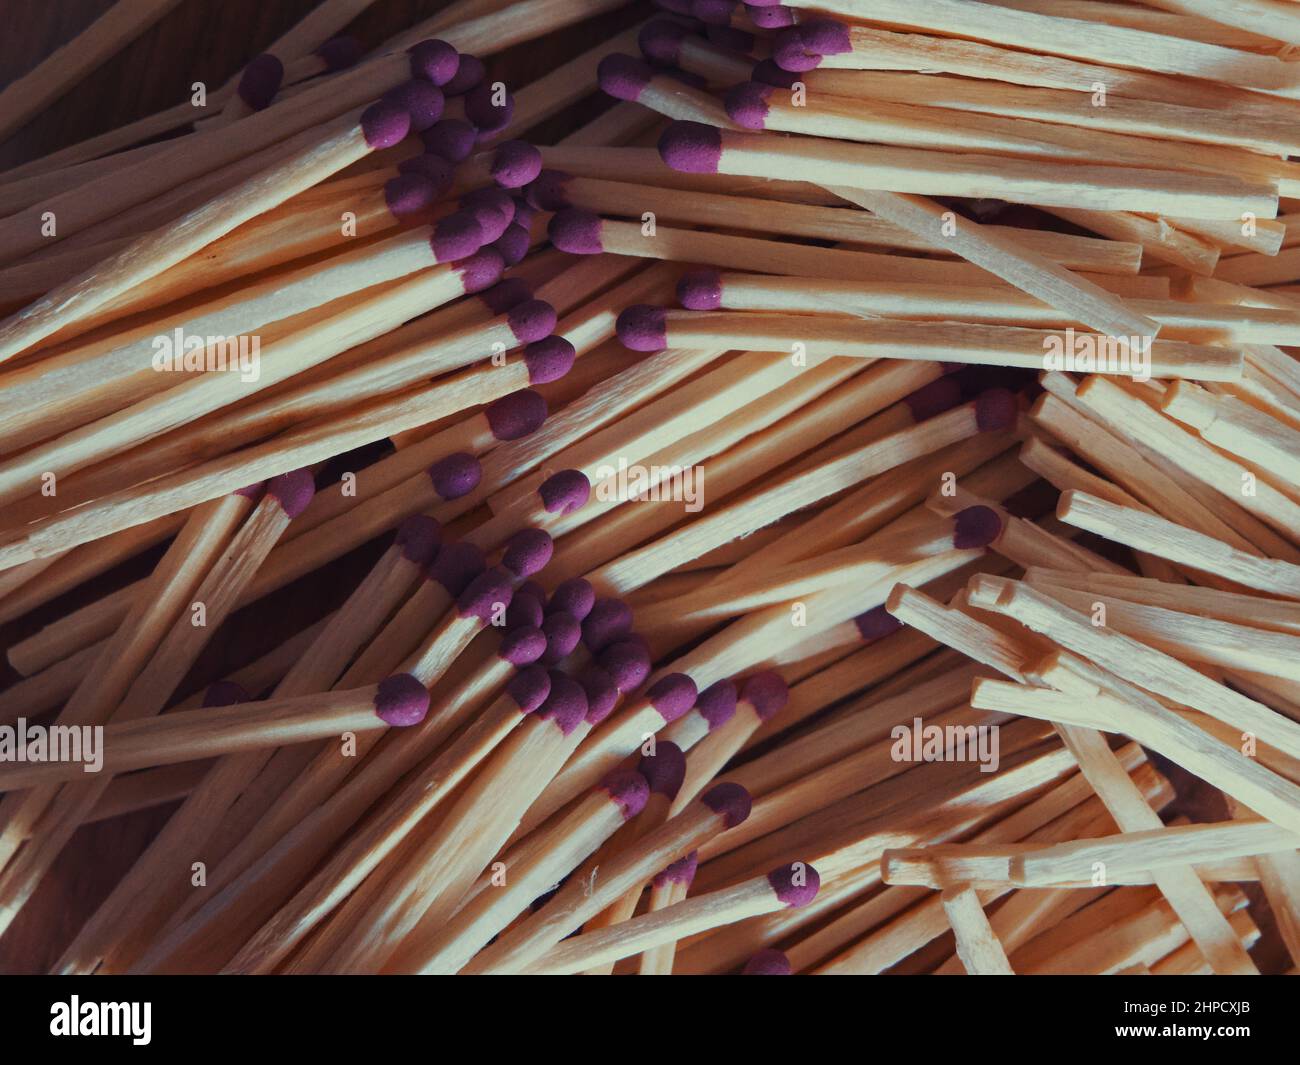 A bunch of matches, a close-up shot. Stock Photo